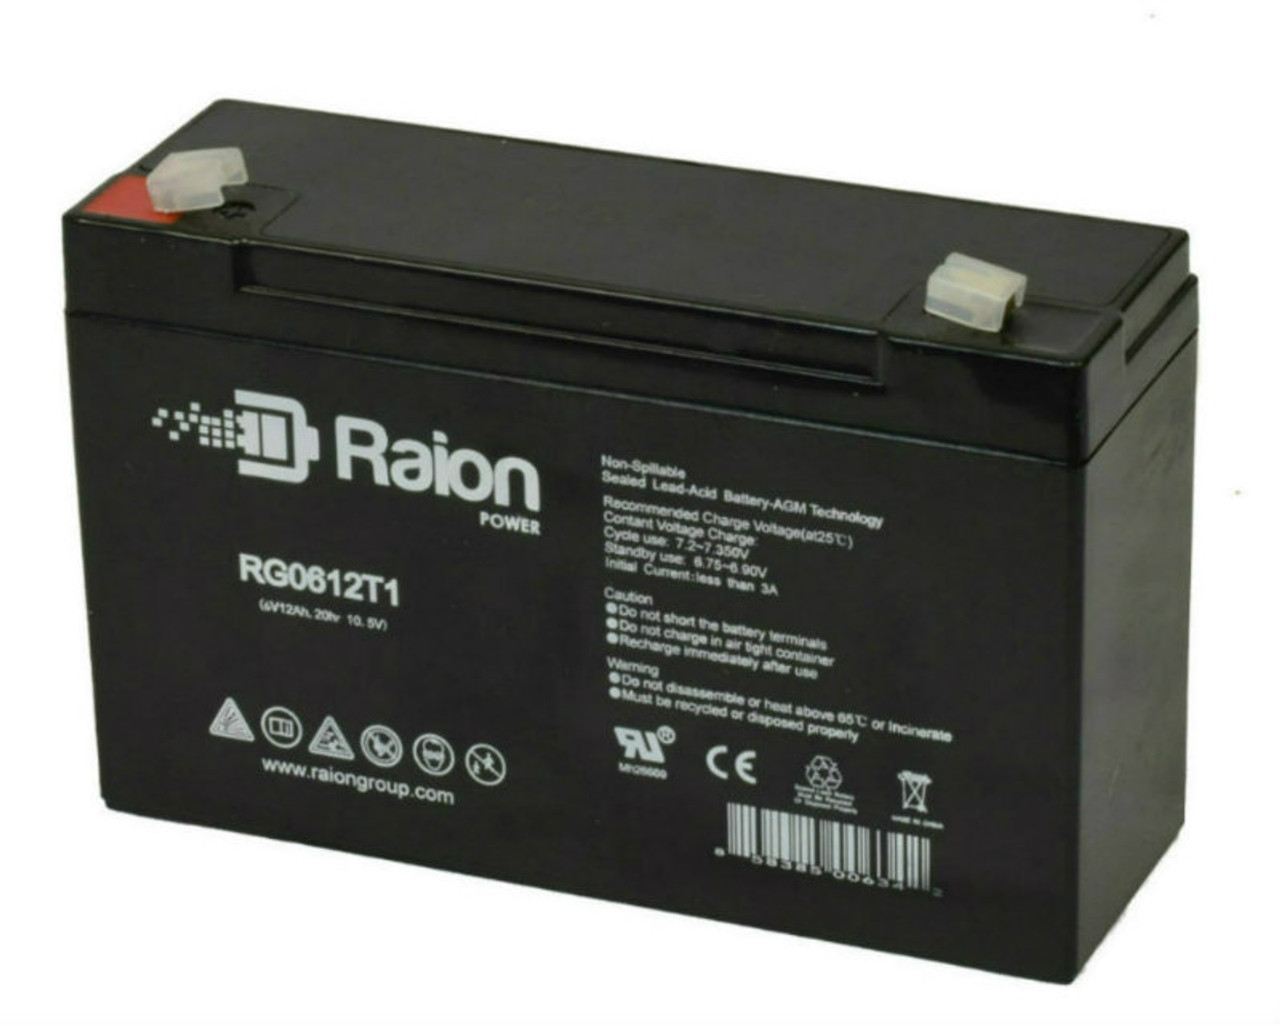 Raion Power RG06120T1 Replacement Battery for LifeLine RC400 Medical Equipment